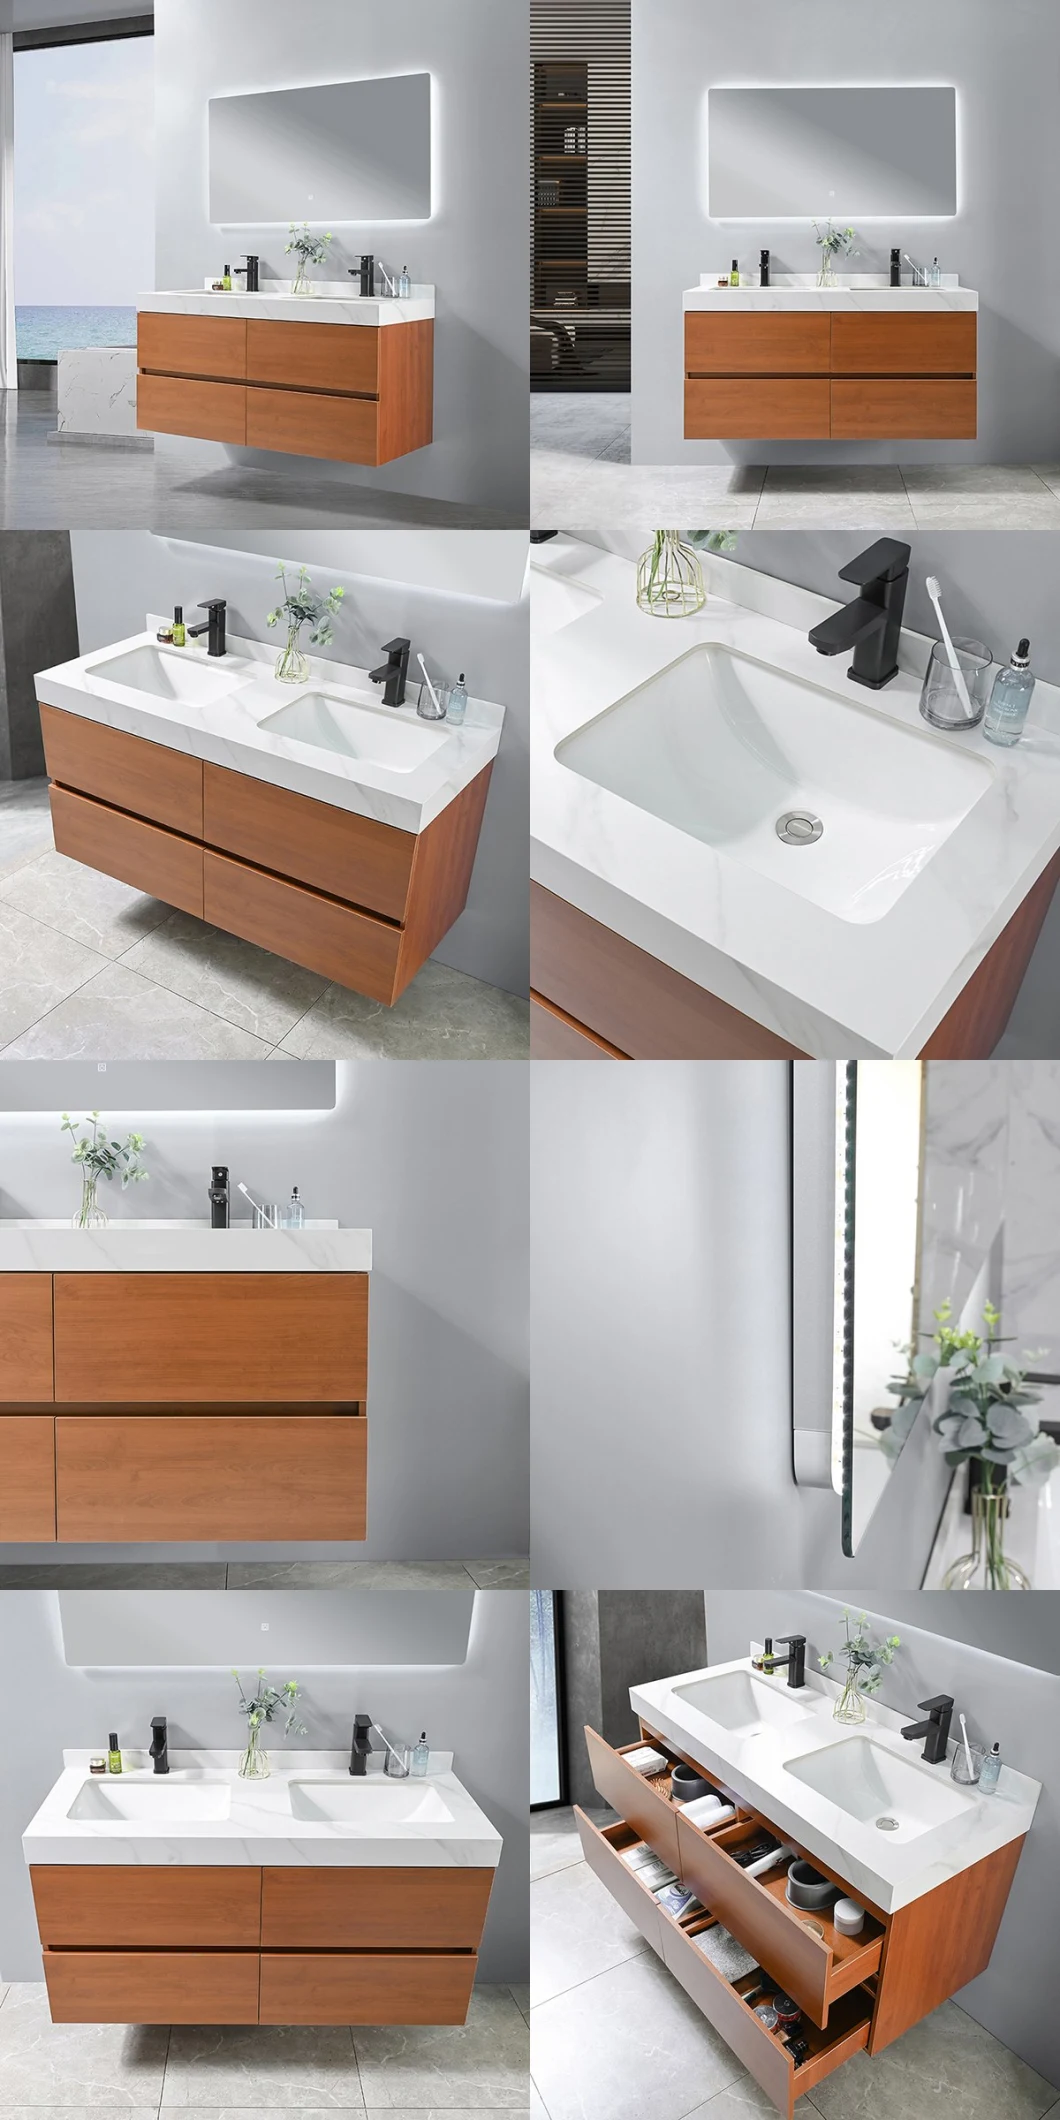 China Supplier Modern Wall Mounted Large 4 Drawer Storage Plywood Cabinet LED Mirror Bathroom Vanity with Double Sink in High Quality